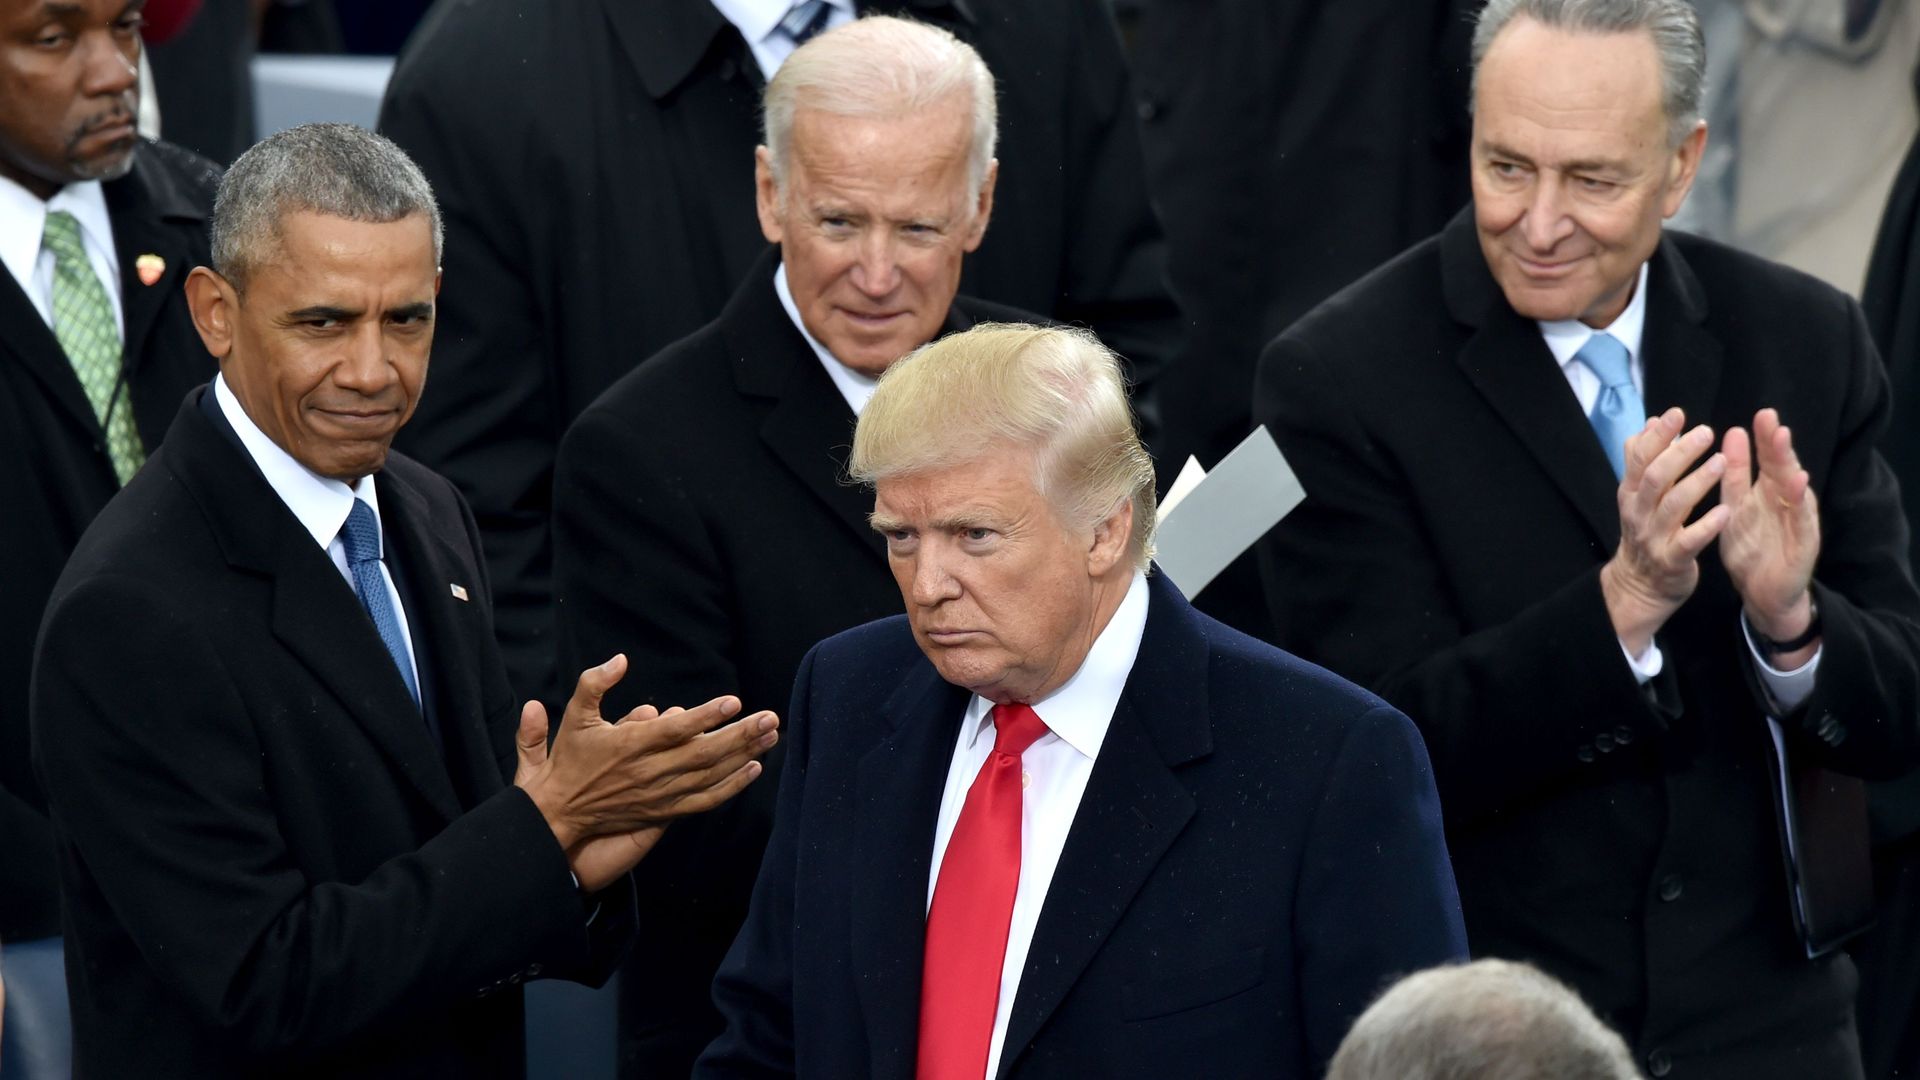 President Donald Trump with former President Barack Obama and former Vice President Joe Biden during Trump's inauguration.